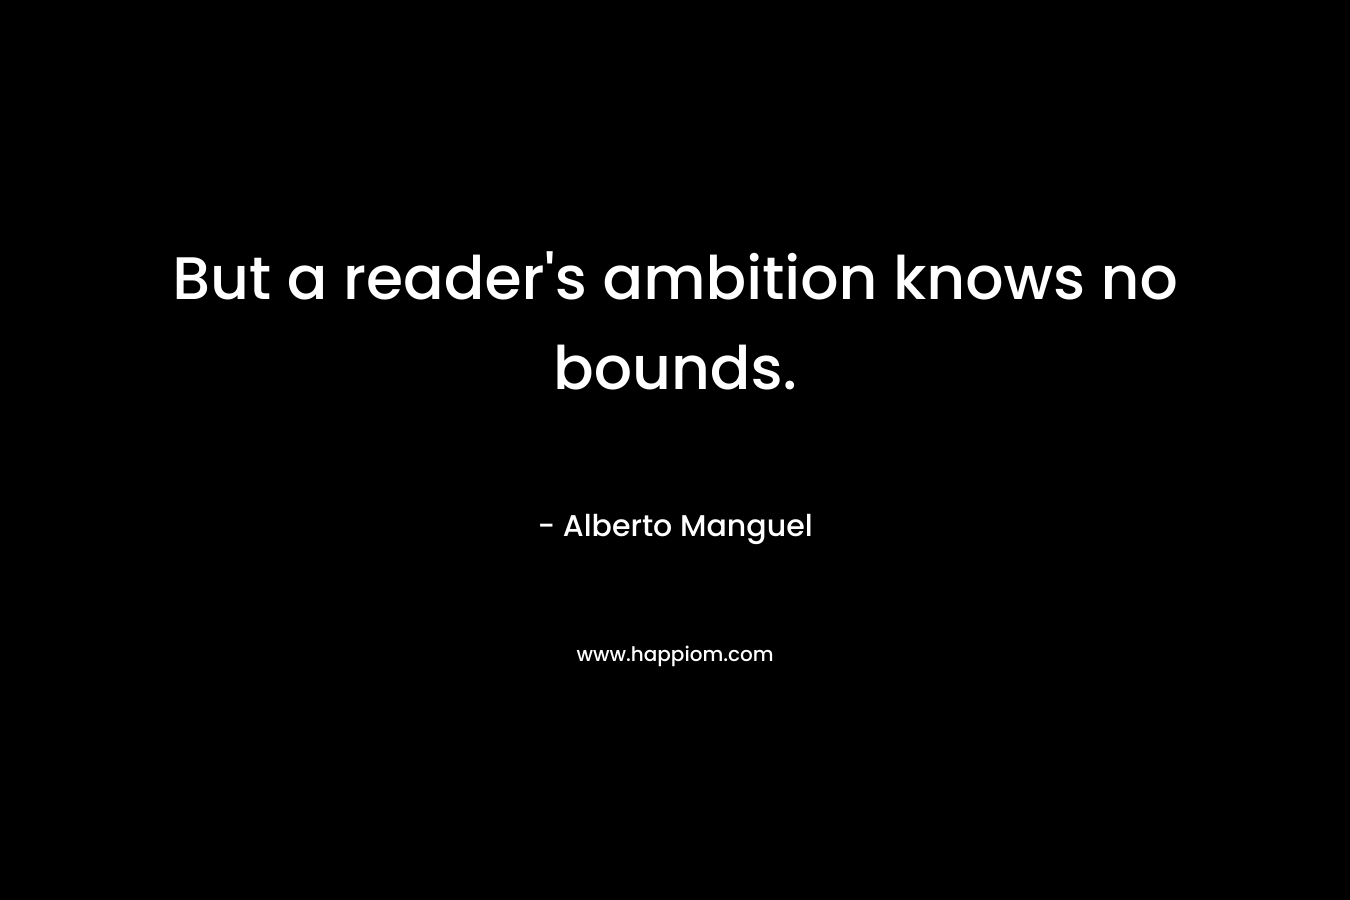 But a reader’s ambition knows no bounds. – Alberto Manguel